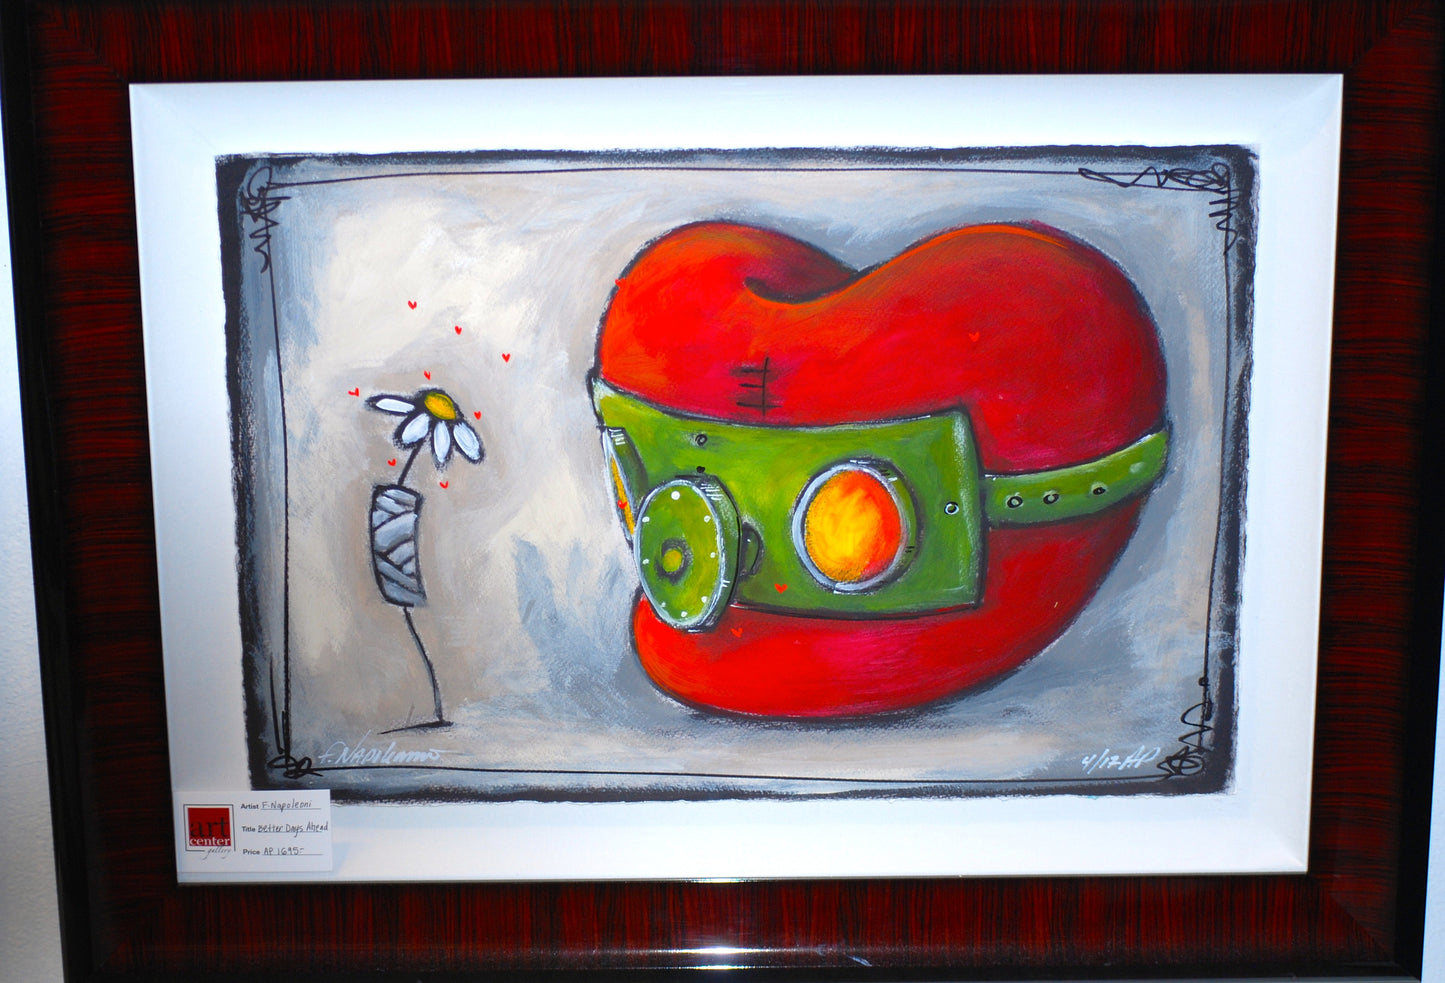 Fabio Napoleoni "Better Days Ahead" Limited Edition Paper Giclee